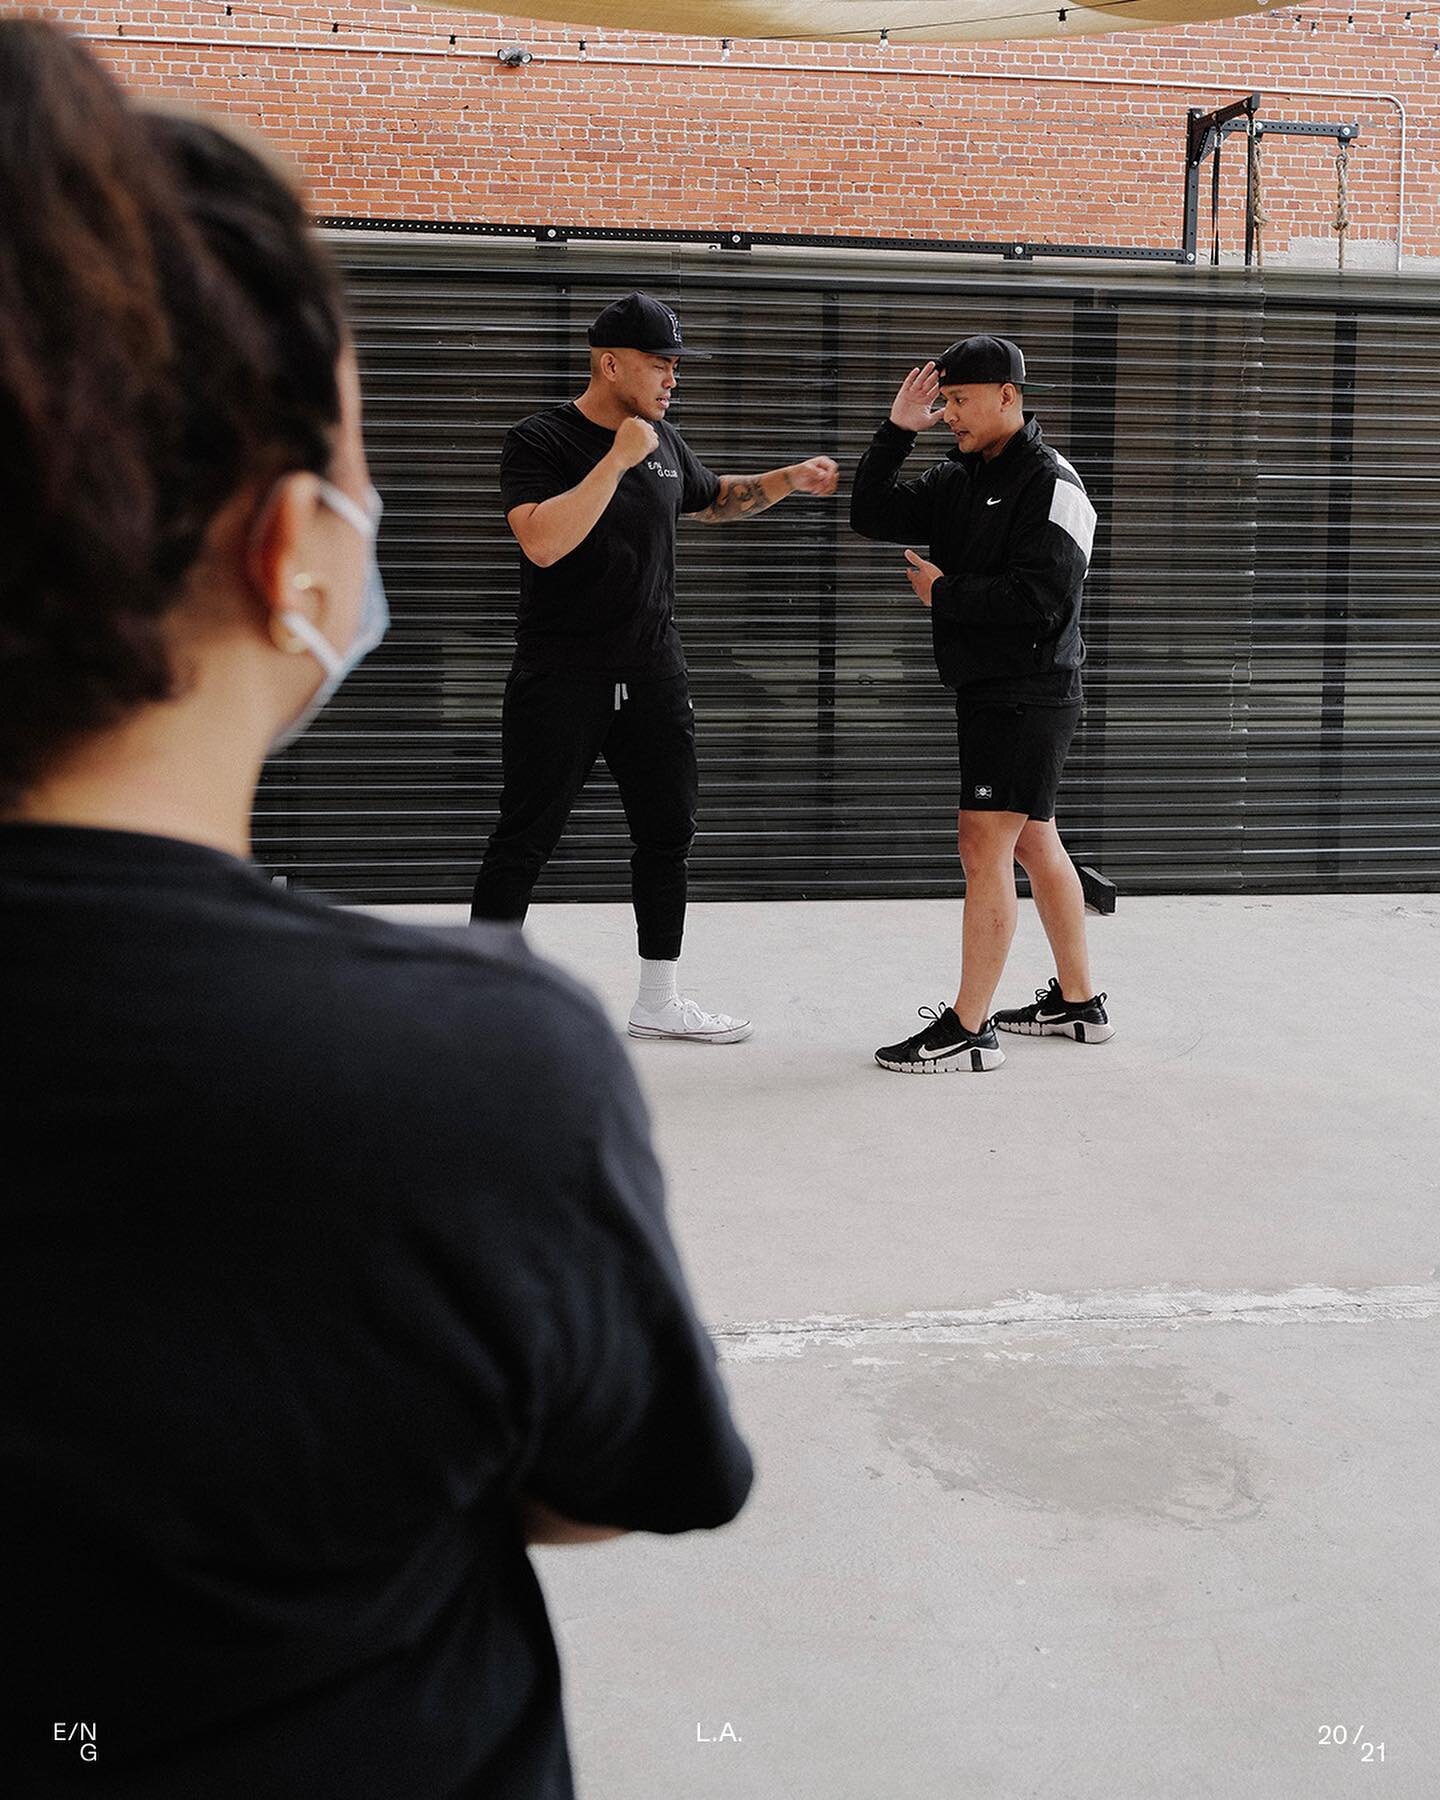 Self-Defense Series by @superbolt.tea x @maxeffortstudio

Martial arts has always been a focal point for our coaches at E/NG. This week, we had the opportunity to team up with Superbolt Tea and @tmaxine_ / Max Effort Studio as part of their self-defe